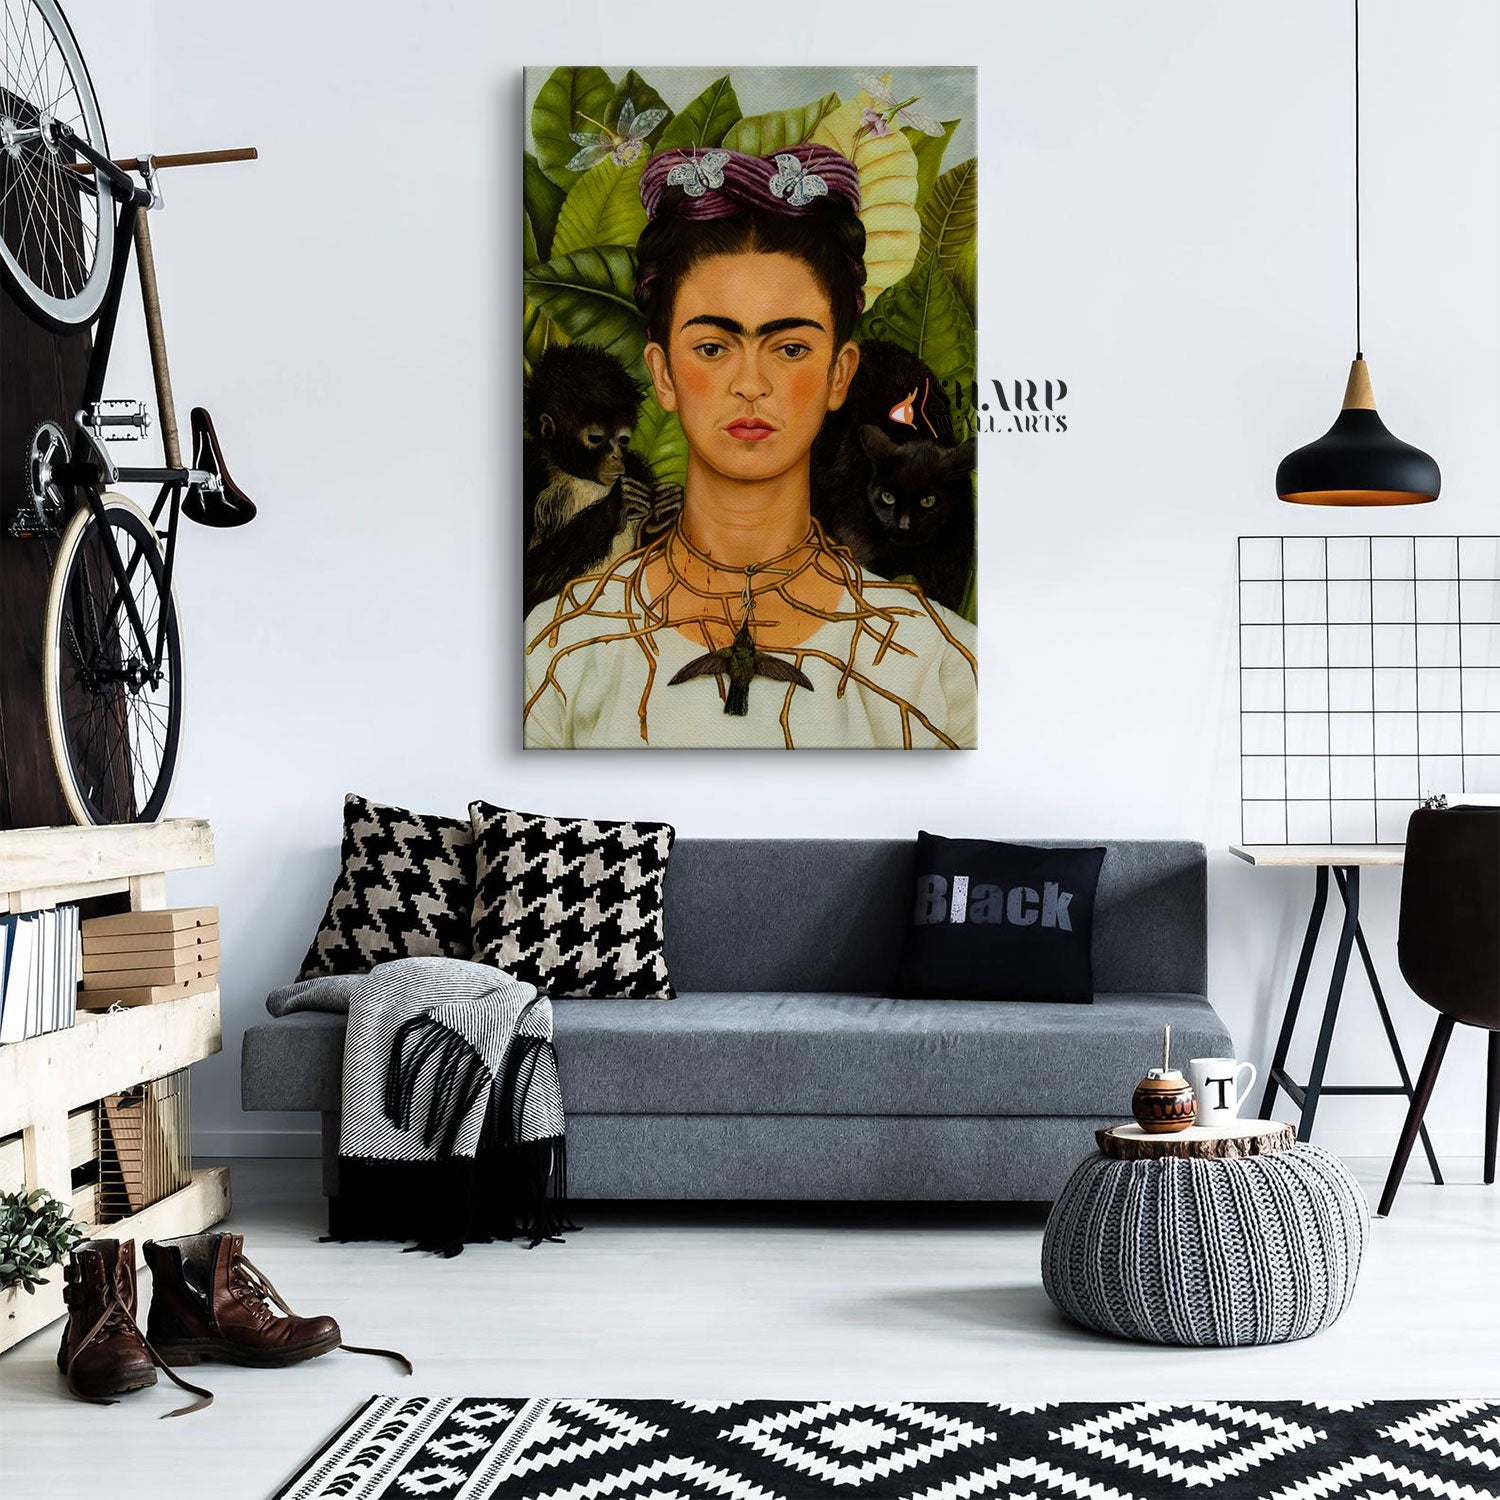 Frida Kahlo Portrait With Thorn Necklace And Hummingbird Canvas Wall Art